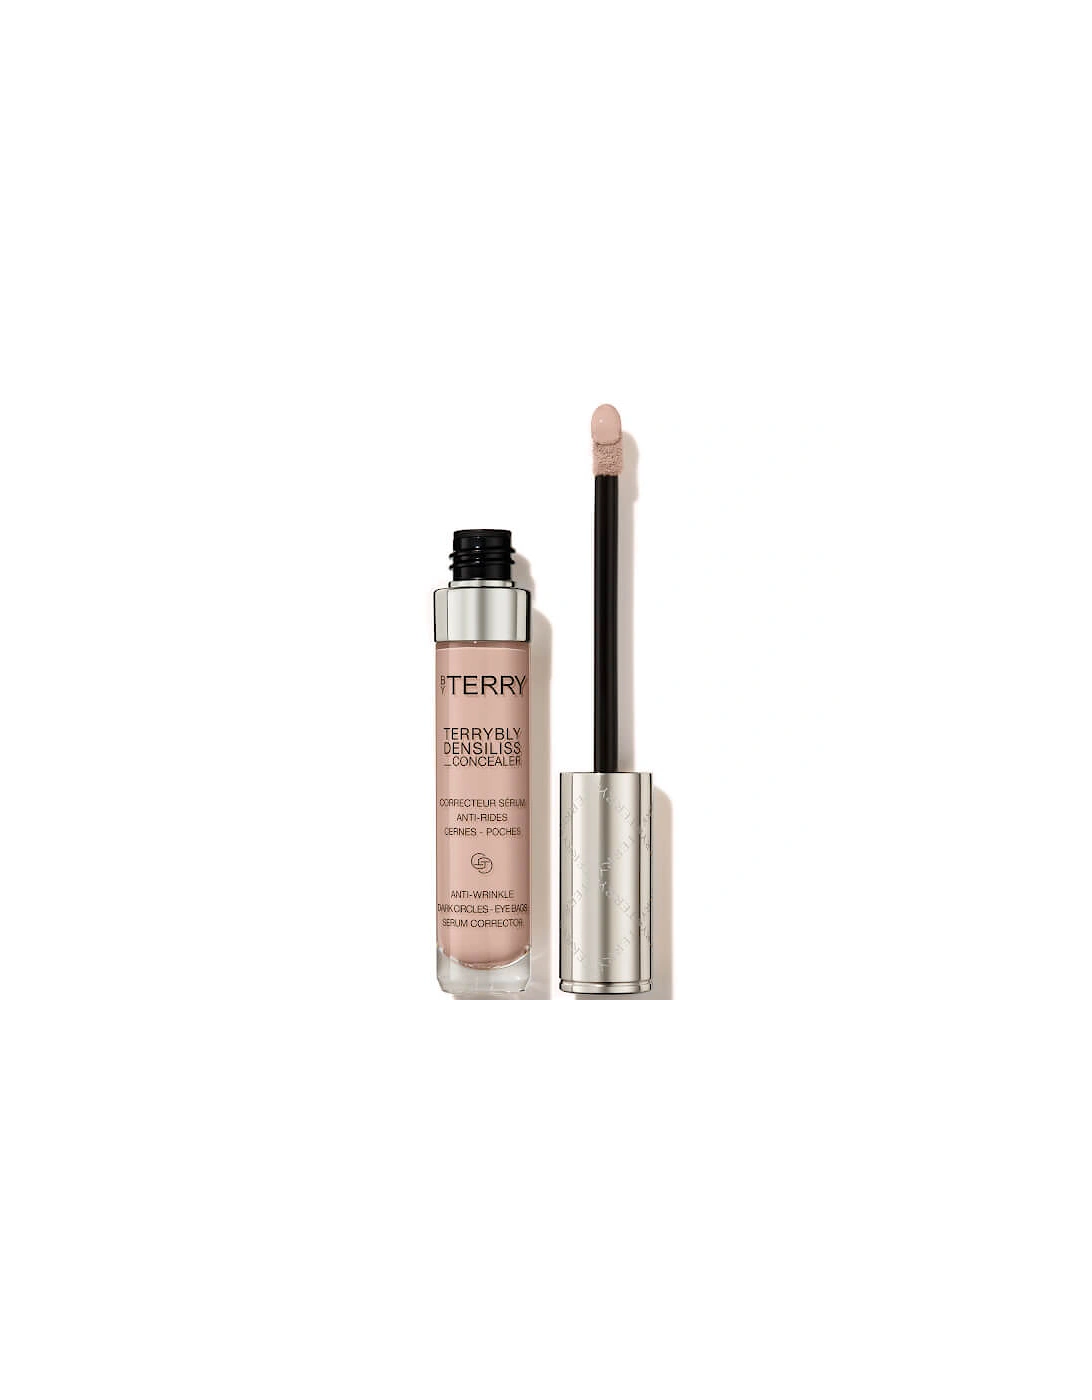 By Terry Terrybly Densiliss Concealer -2. Vanilla Beige, 2 of 1